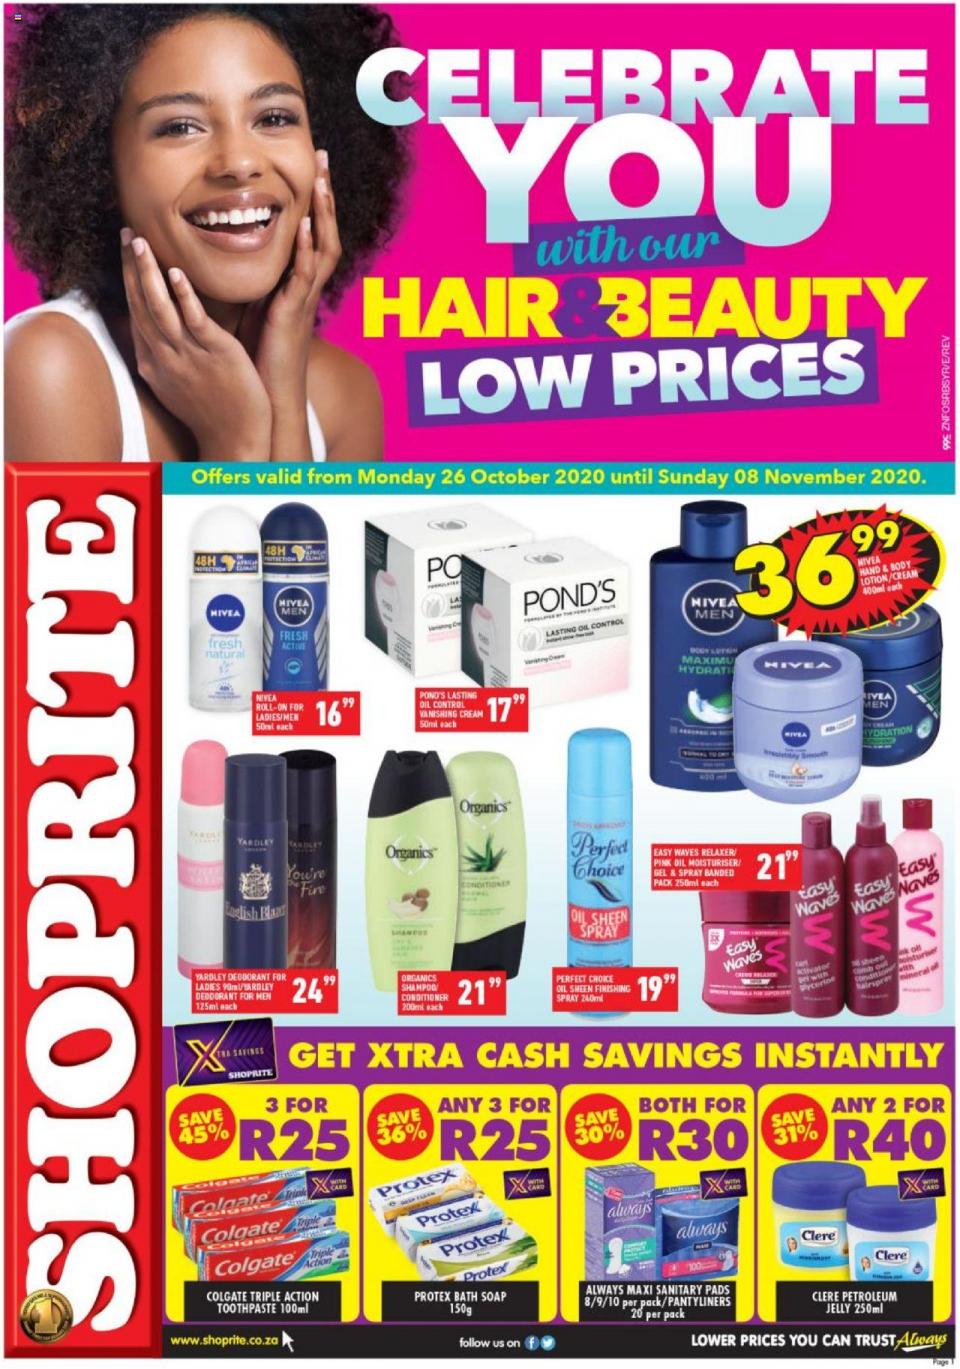 Shoprite Specials Hair & Beauty Promotion 26 October 2020